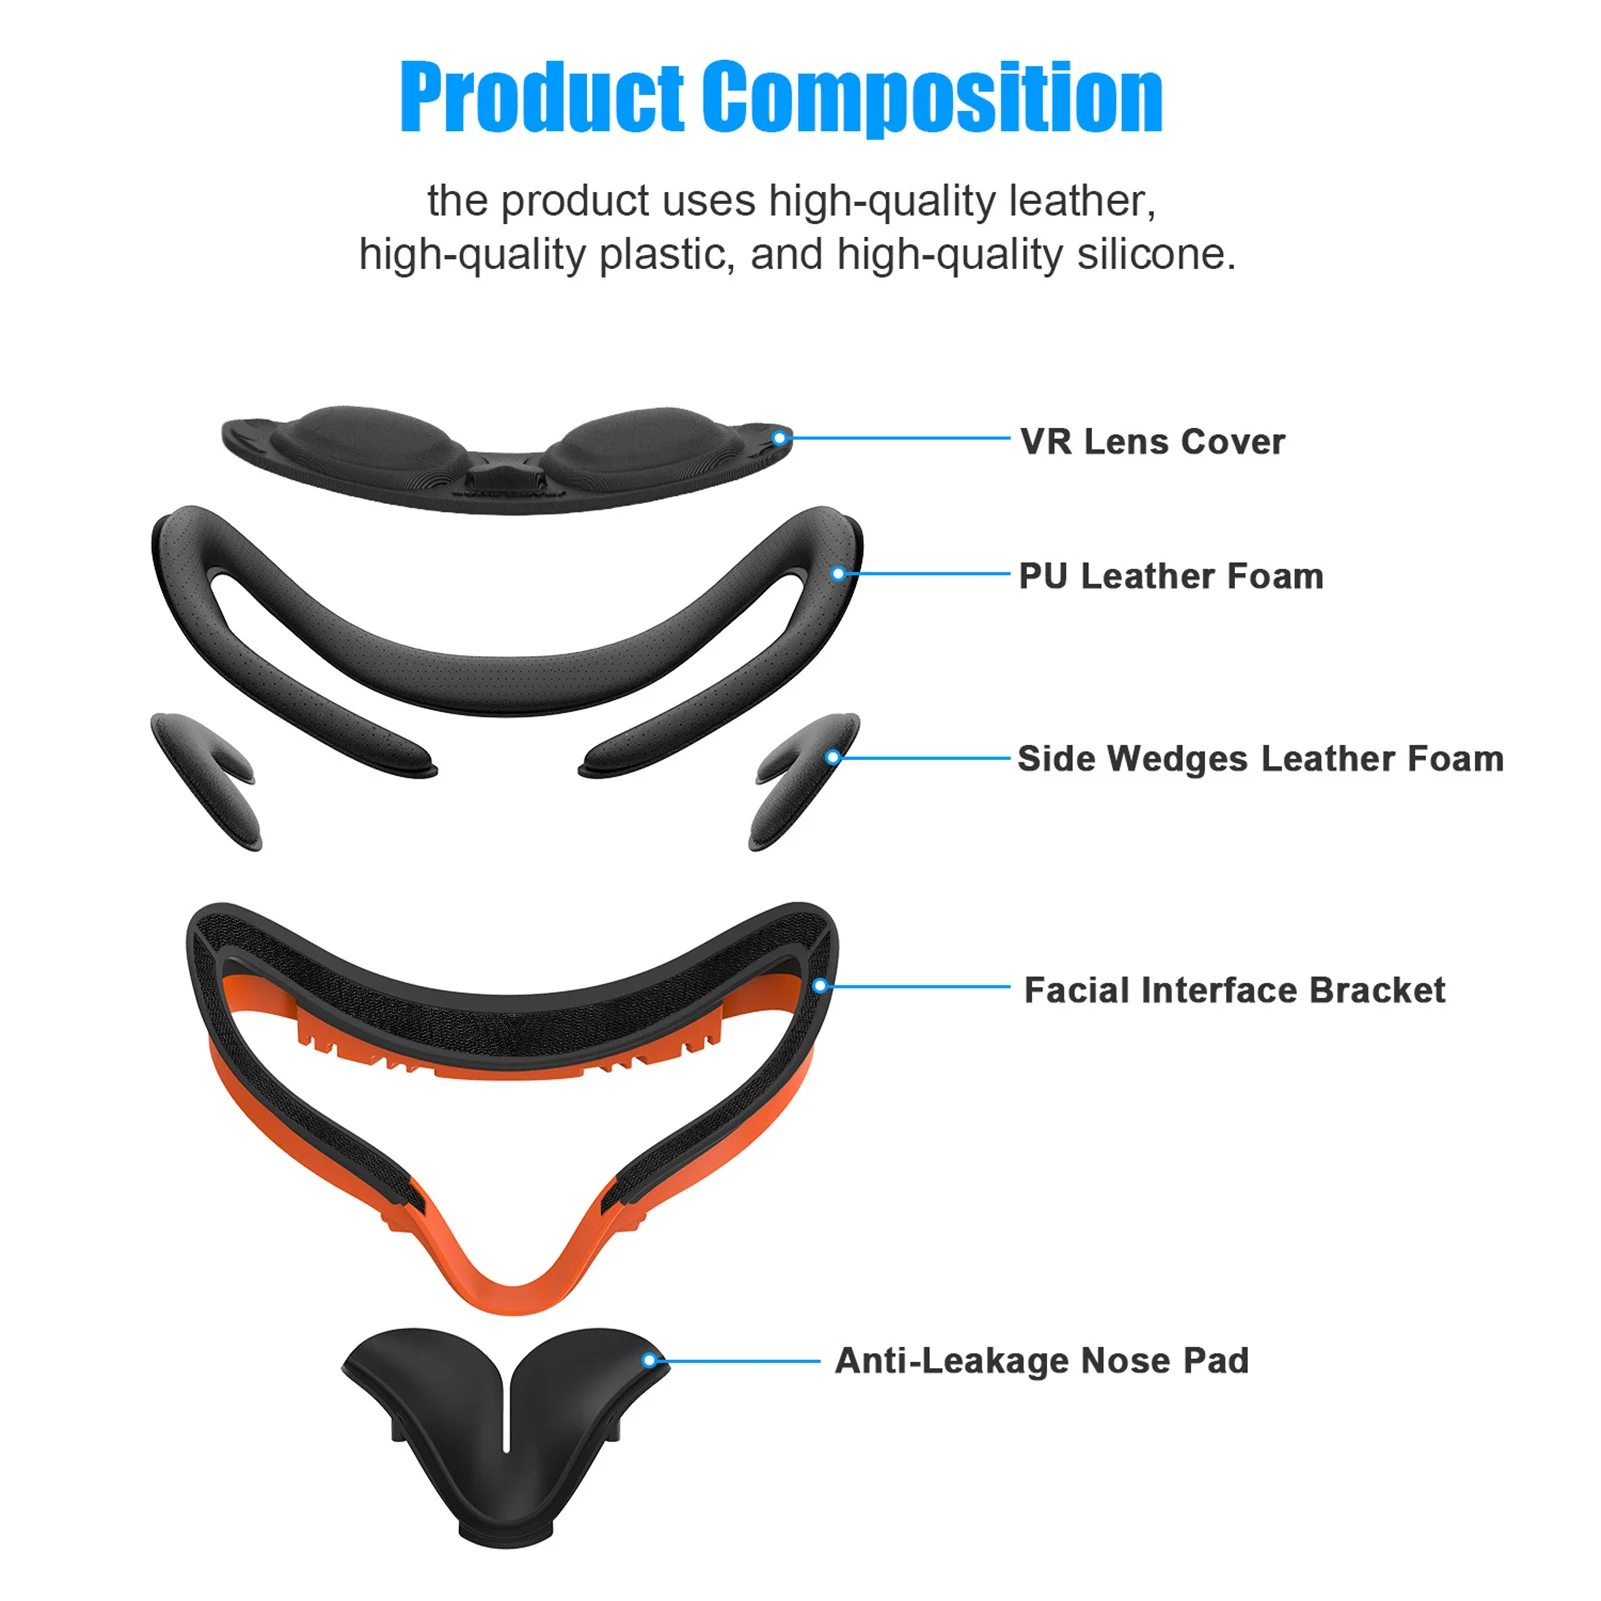 7in1 Resilient VR Facial Bracket & Anti-Leakage Light PU Leather Foam Face Cover Pad Comfort Accessories For Oculus Quest 2 VR enlarge